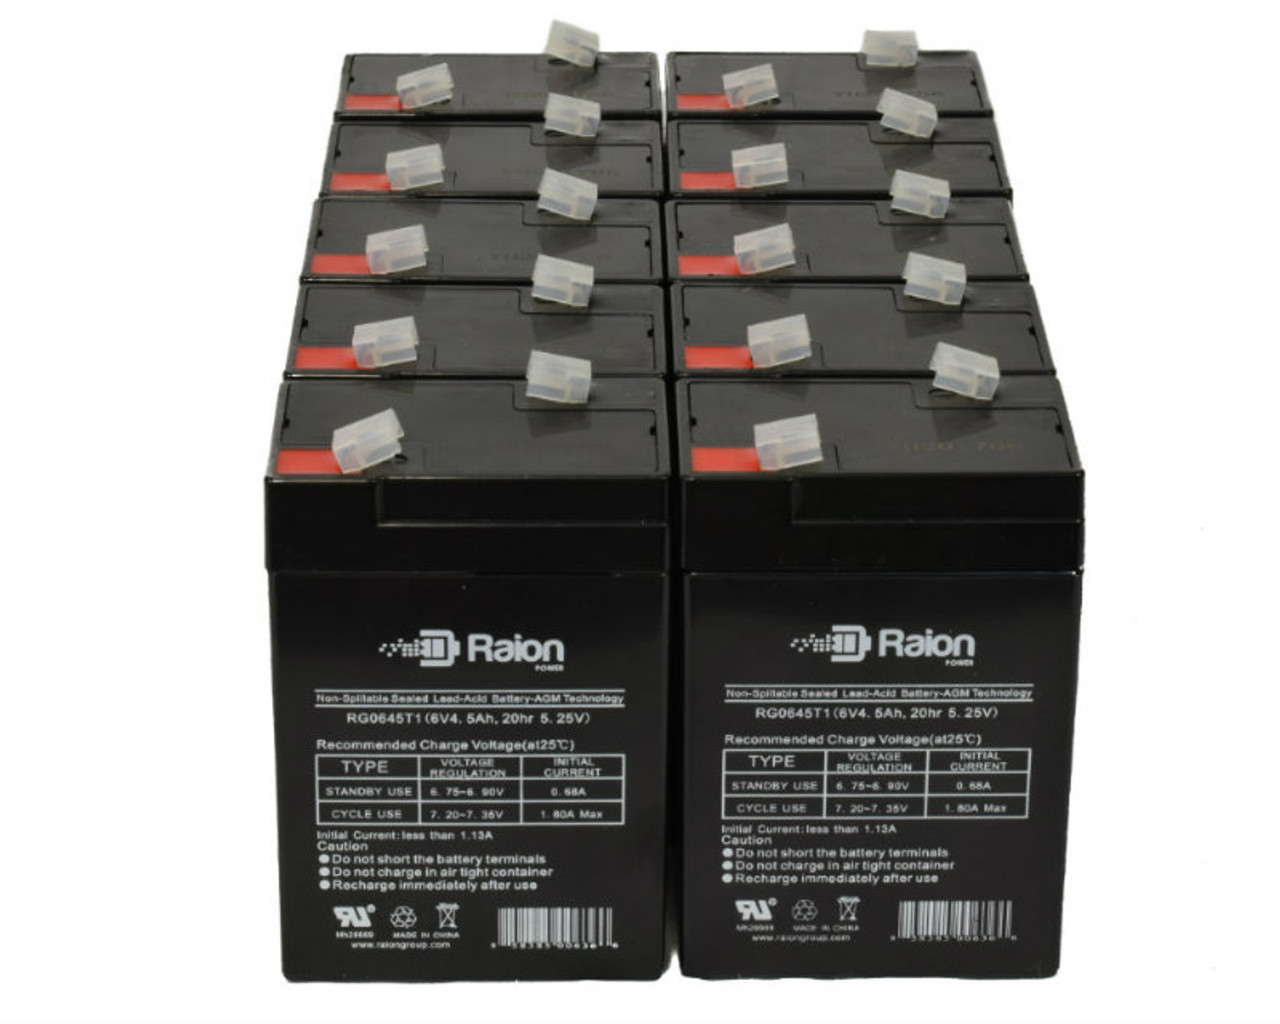 Raion Power 6V 4.5Ah Replacement Emergency Light Battery for Astralite 20-0008 - 10 Pack